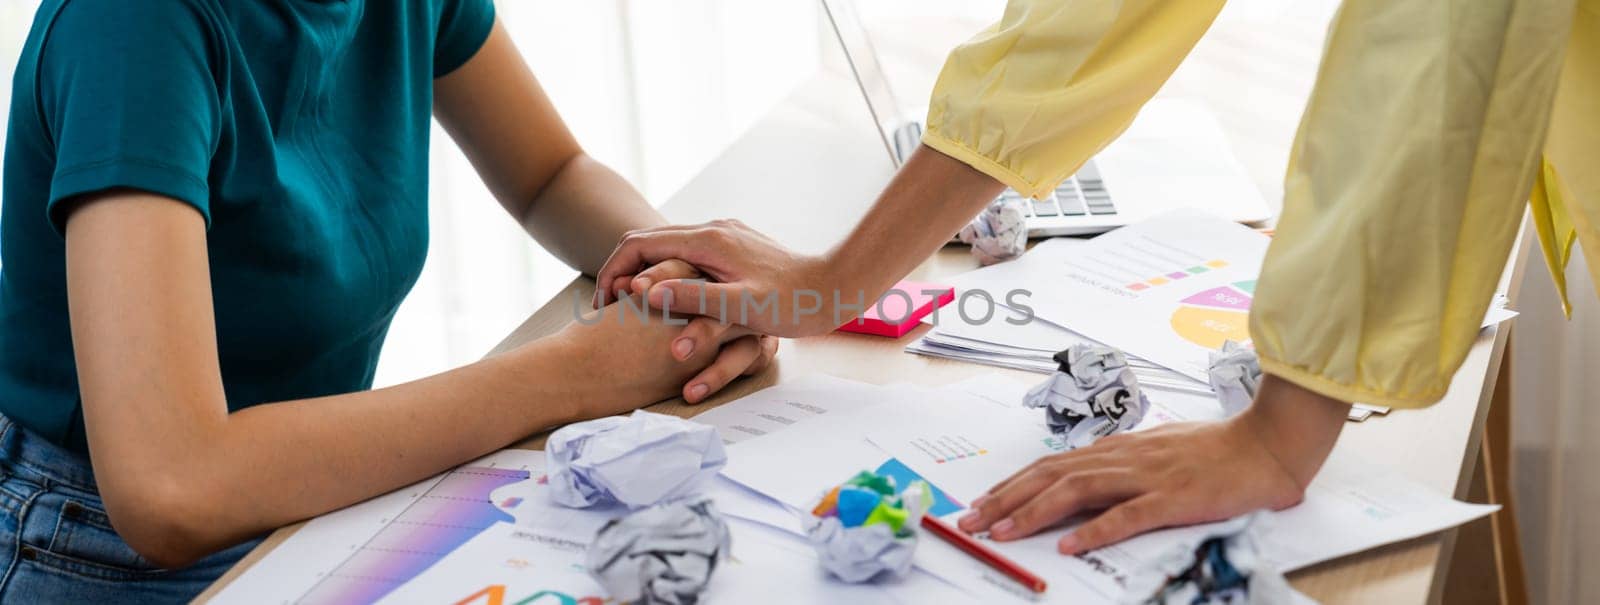 Panorama banner startup employee holding hand to stressful colleague. Synergic by biancoblue